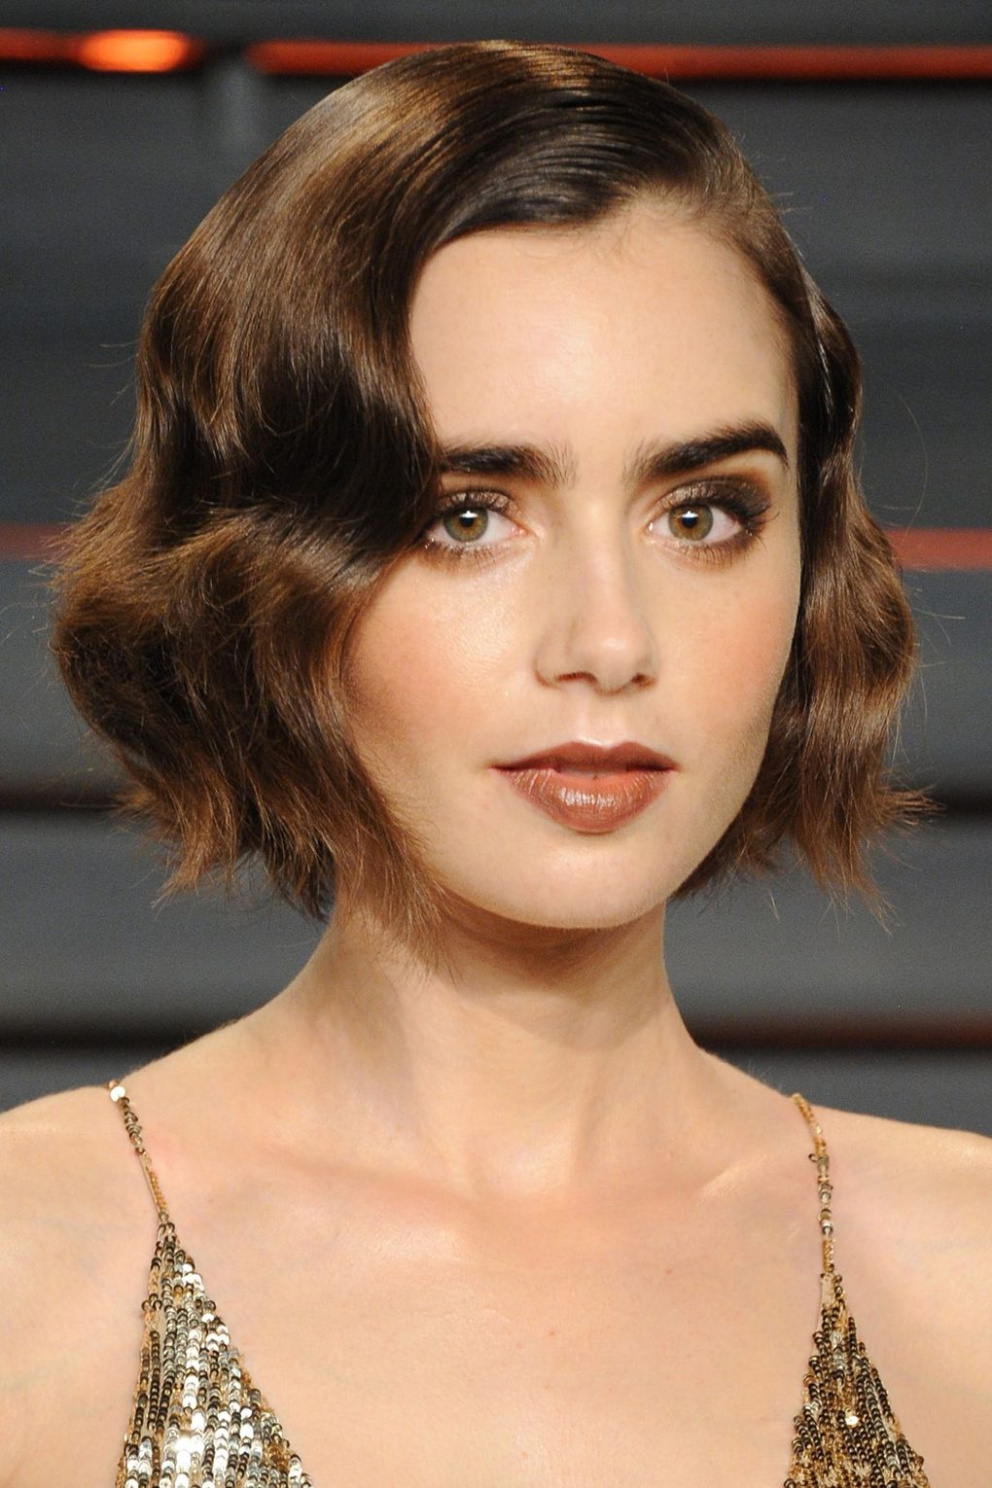 Lily Collins
